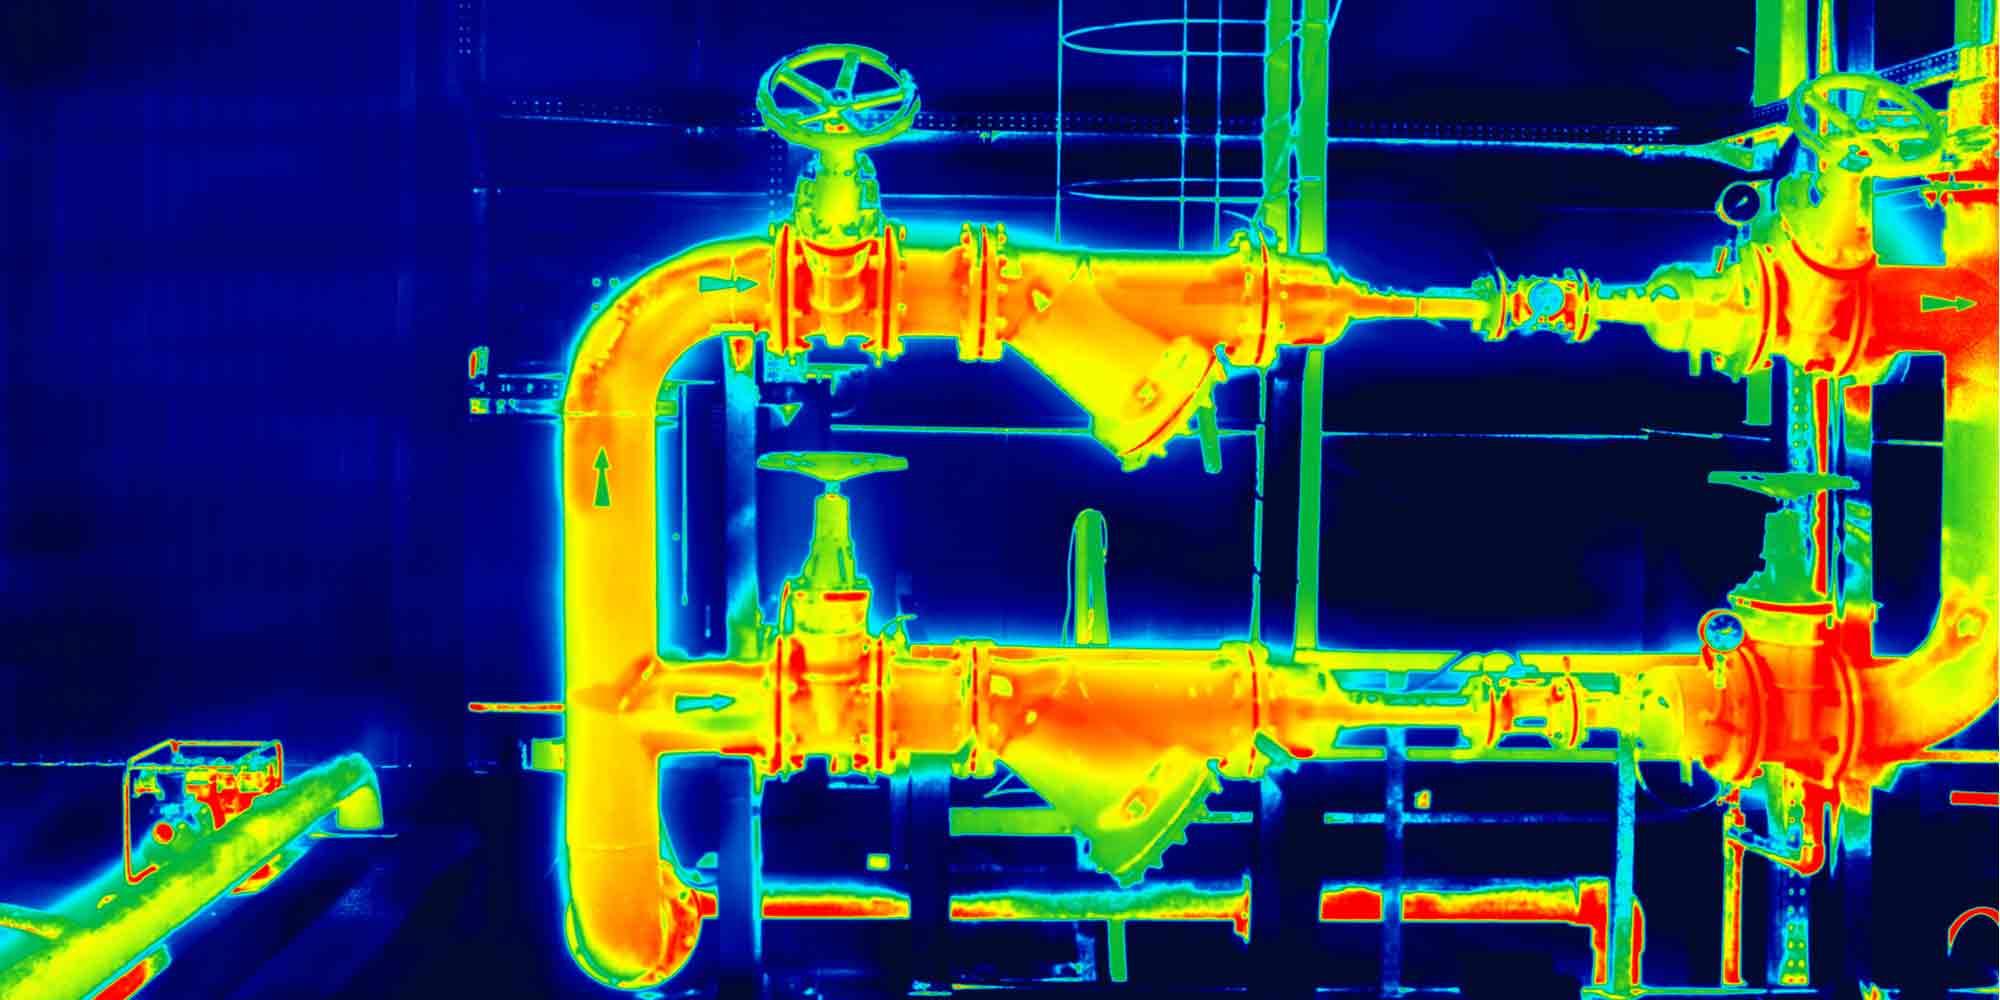 Thermal infrared cameras and video analytics for oil and gas installations and fire detection